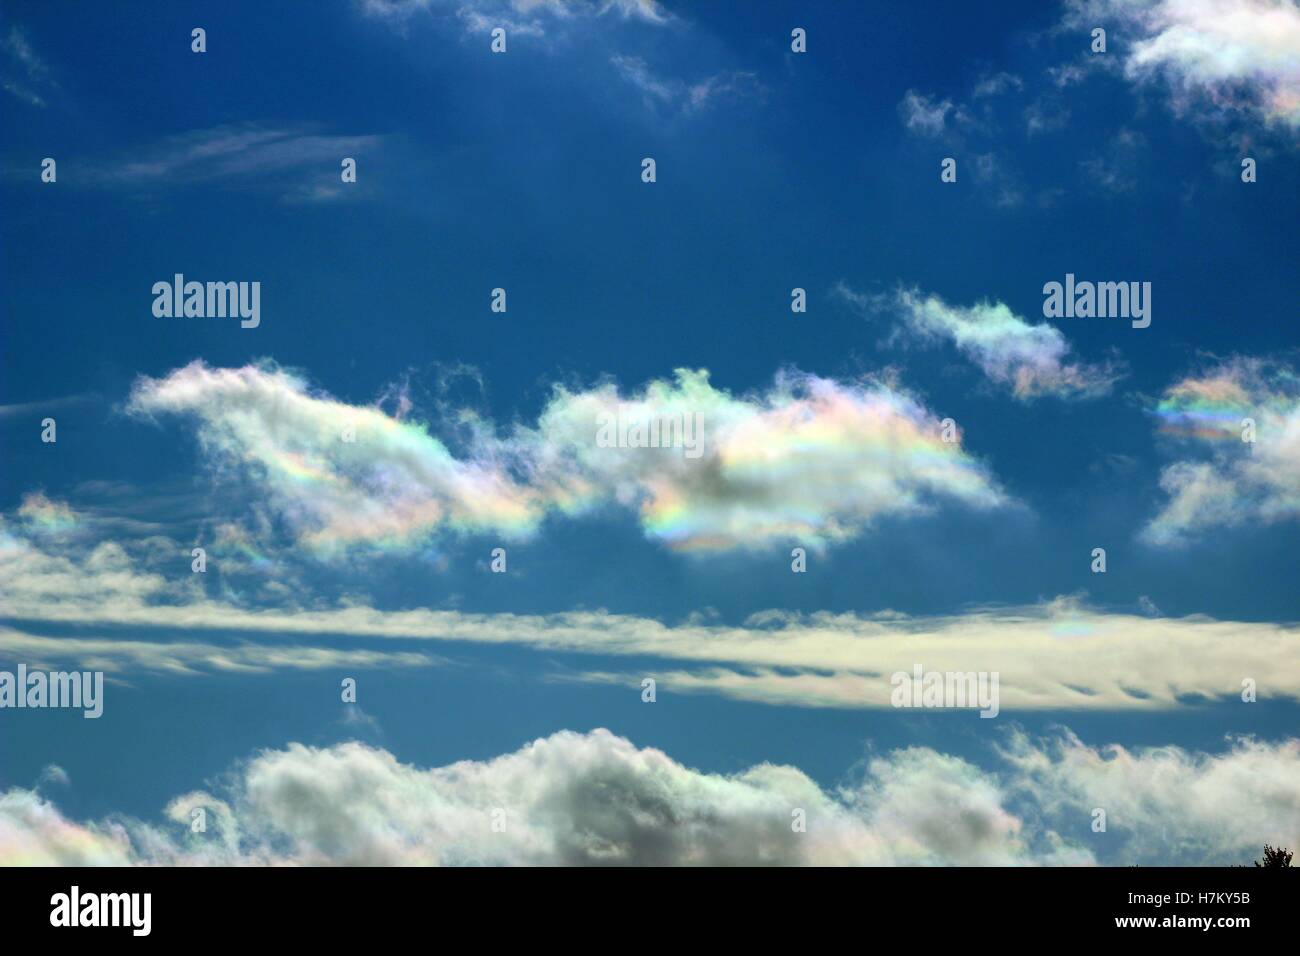 Iridescent Rainbow Clouds In A Deep Blue Sky Stock Photo